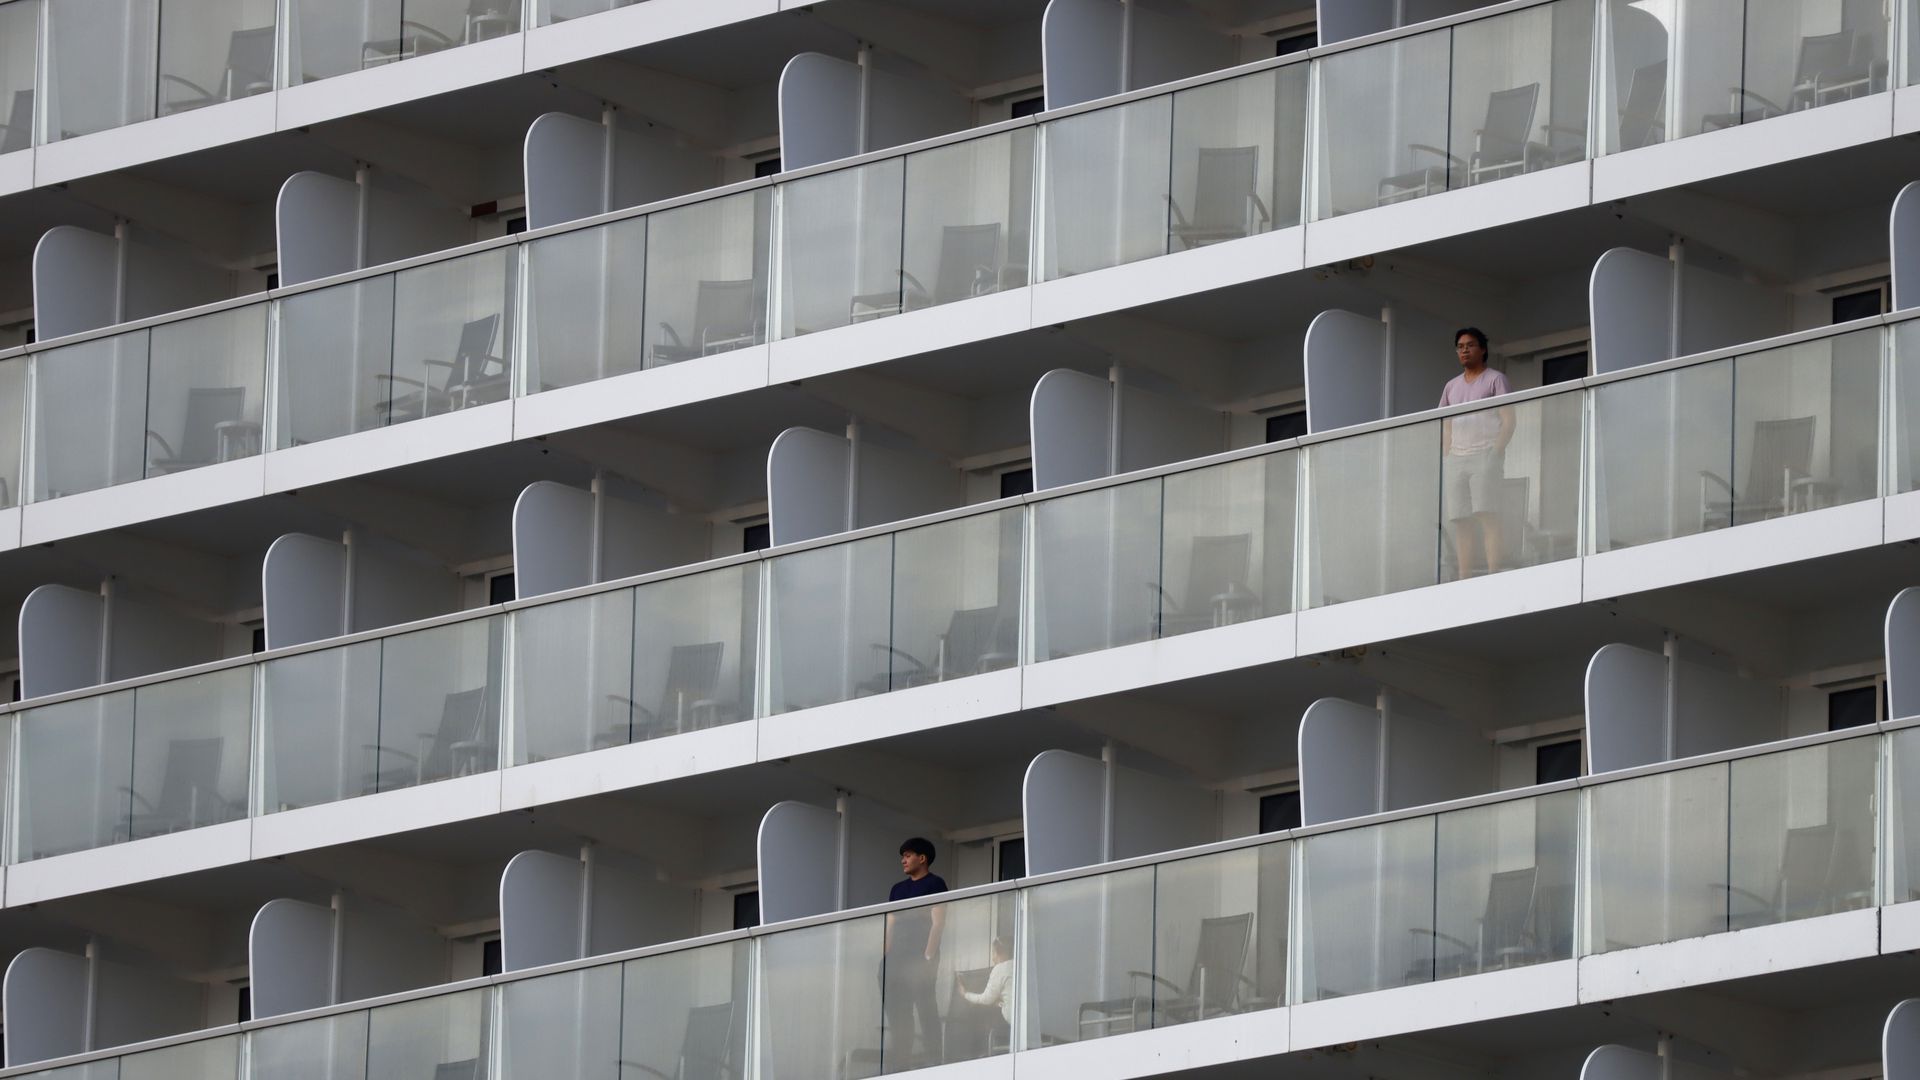 Passengers of a cruise ship are perched on their balconies.